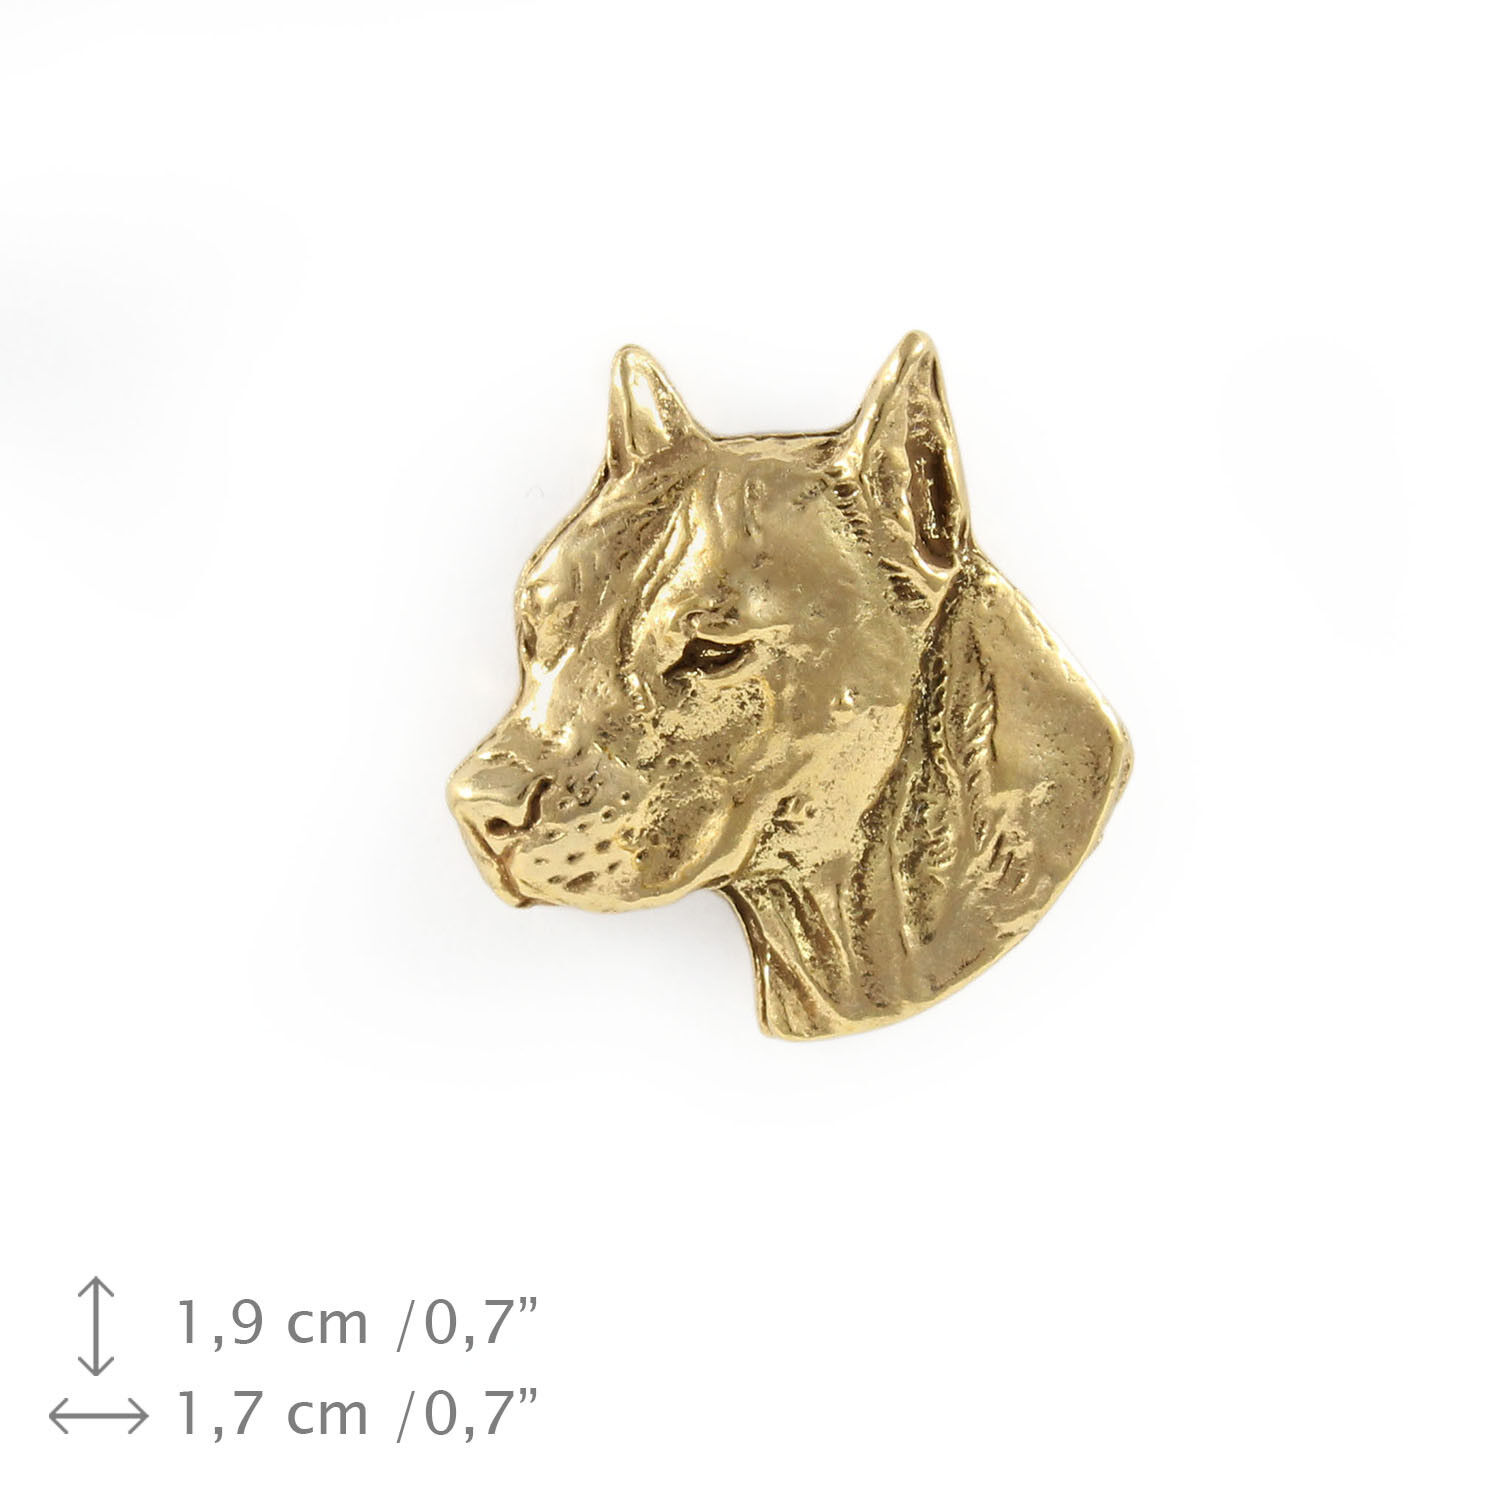 Amstaff Cropped (head), gold covered pin, high quality Art Dog CA